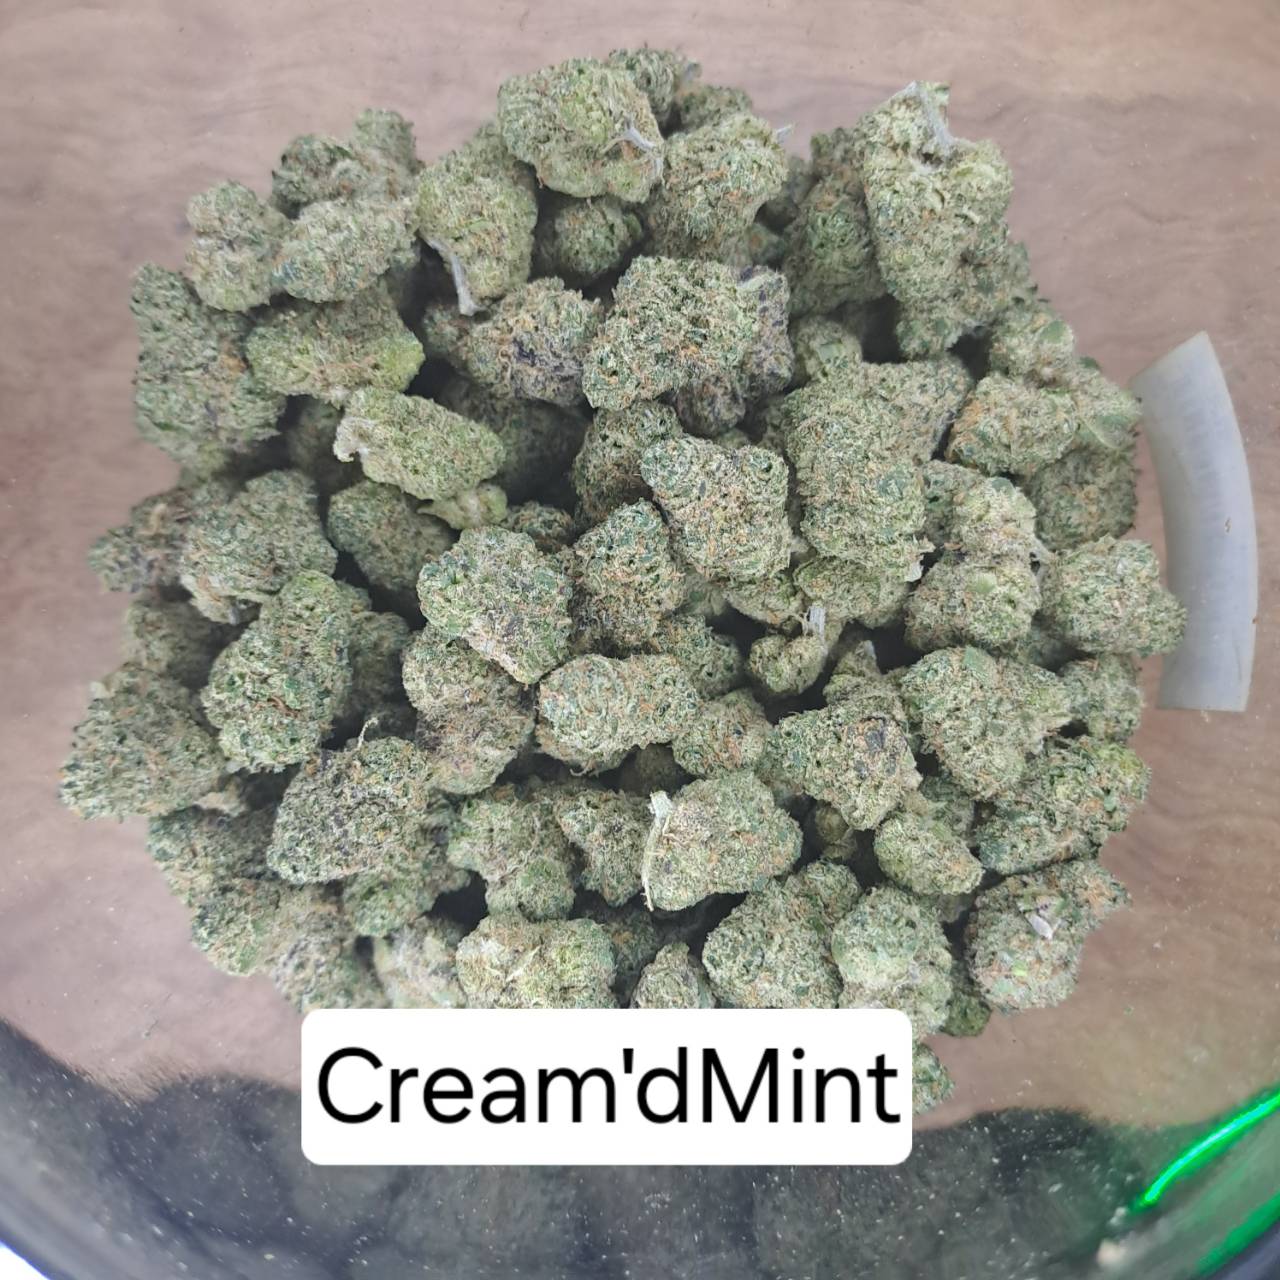 Product Image for Cream'D Mint